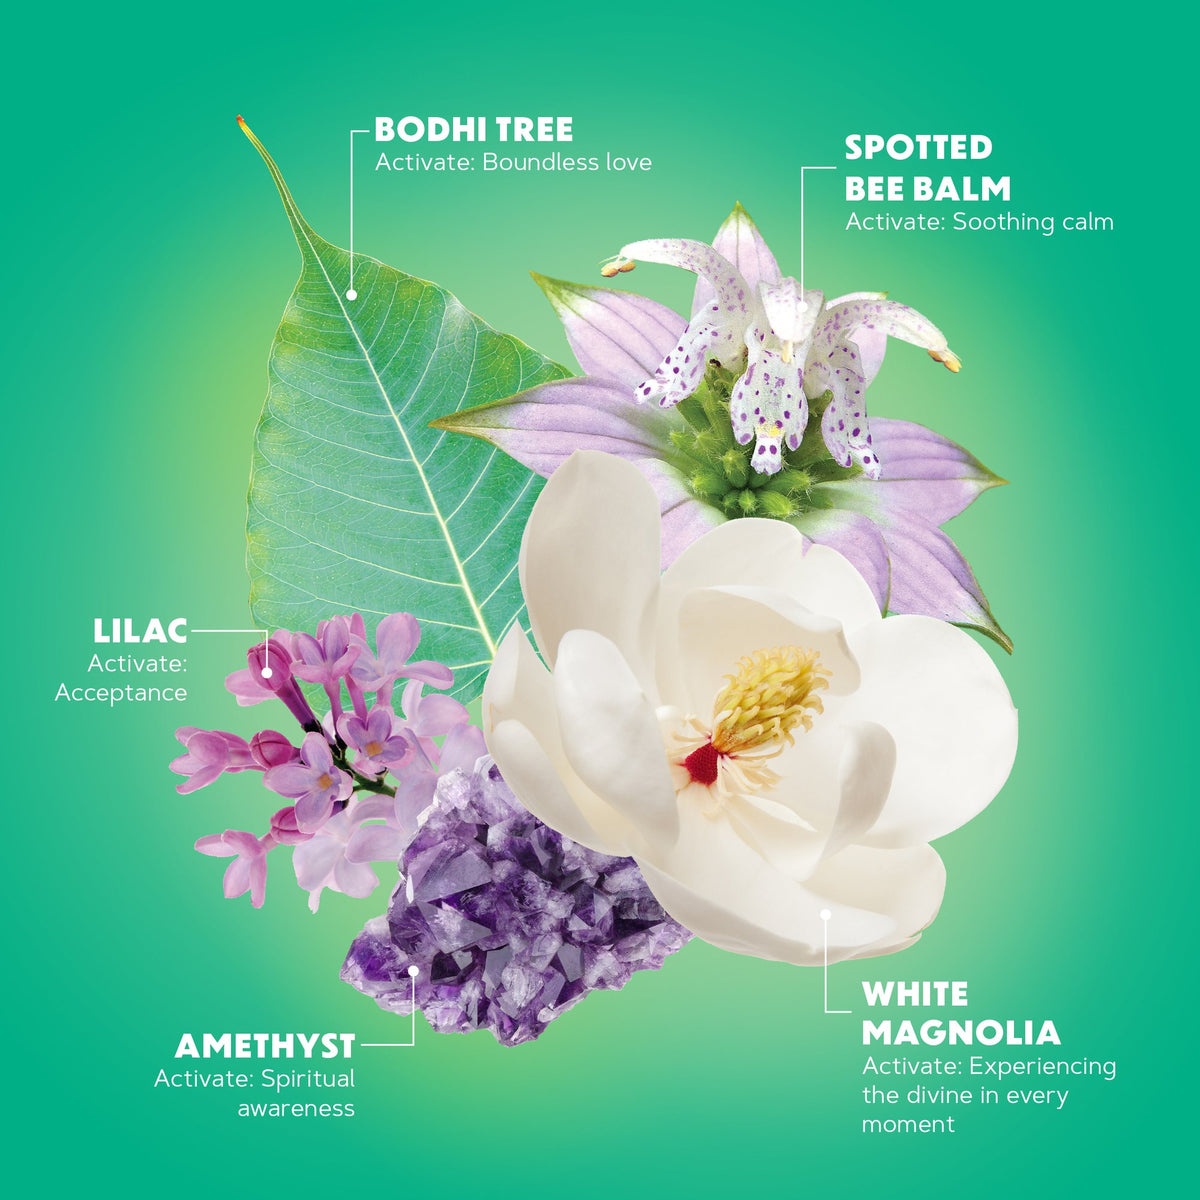 Finding Compassion with Magnolia Essential Oil 